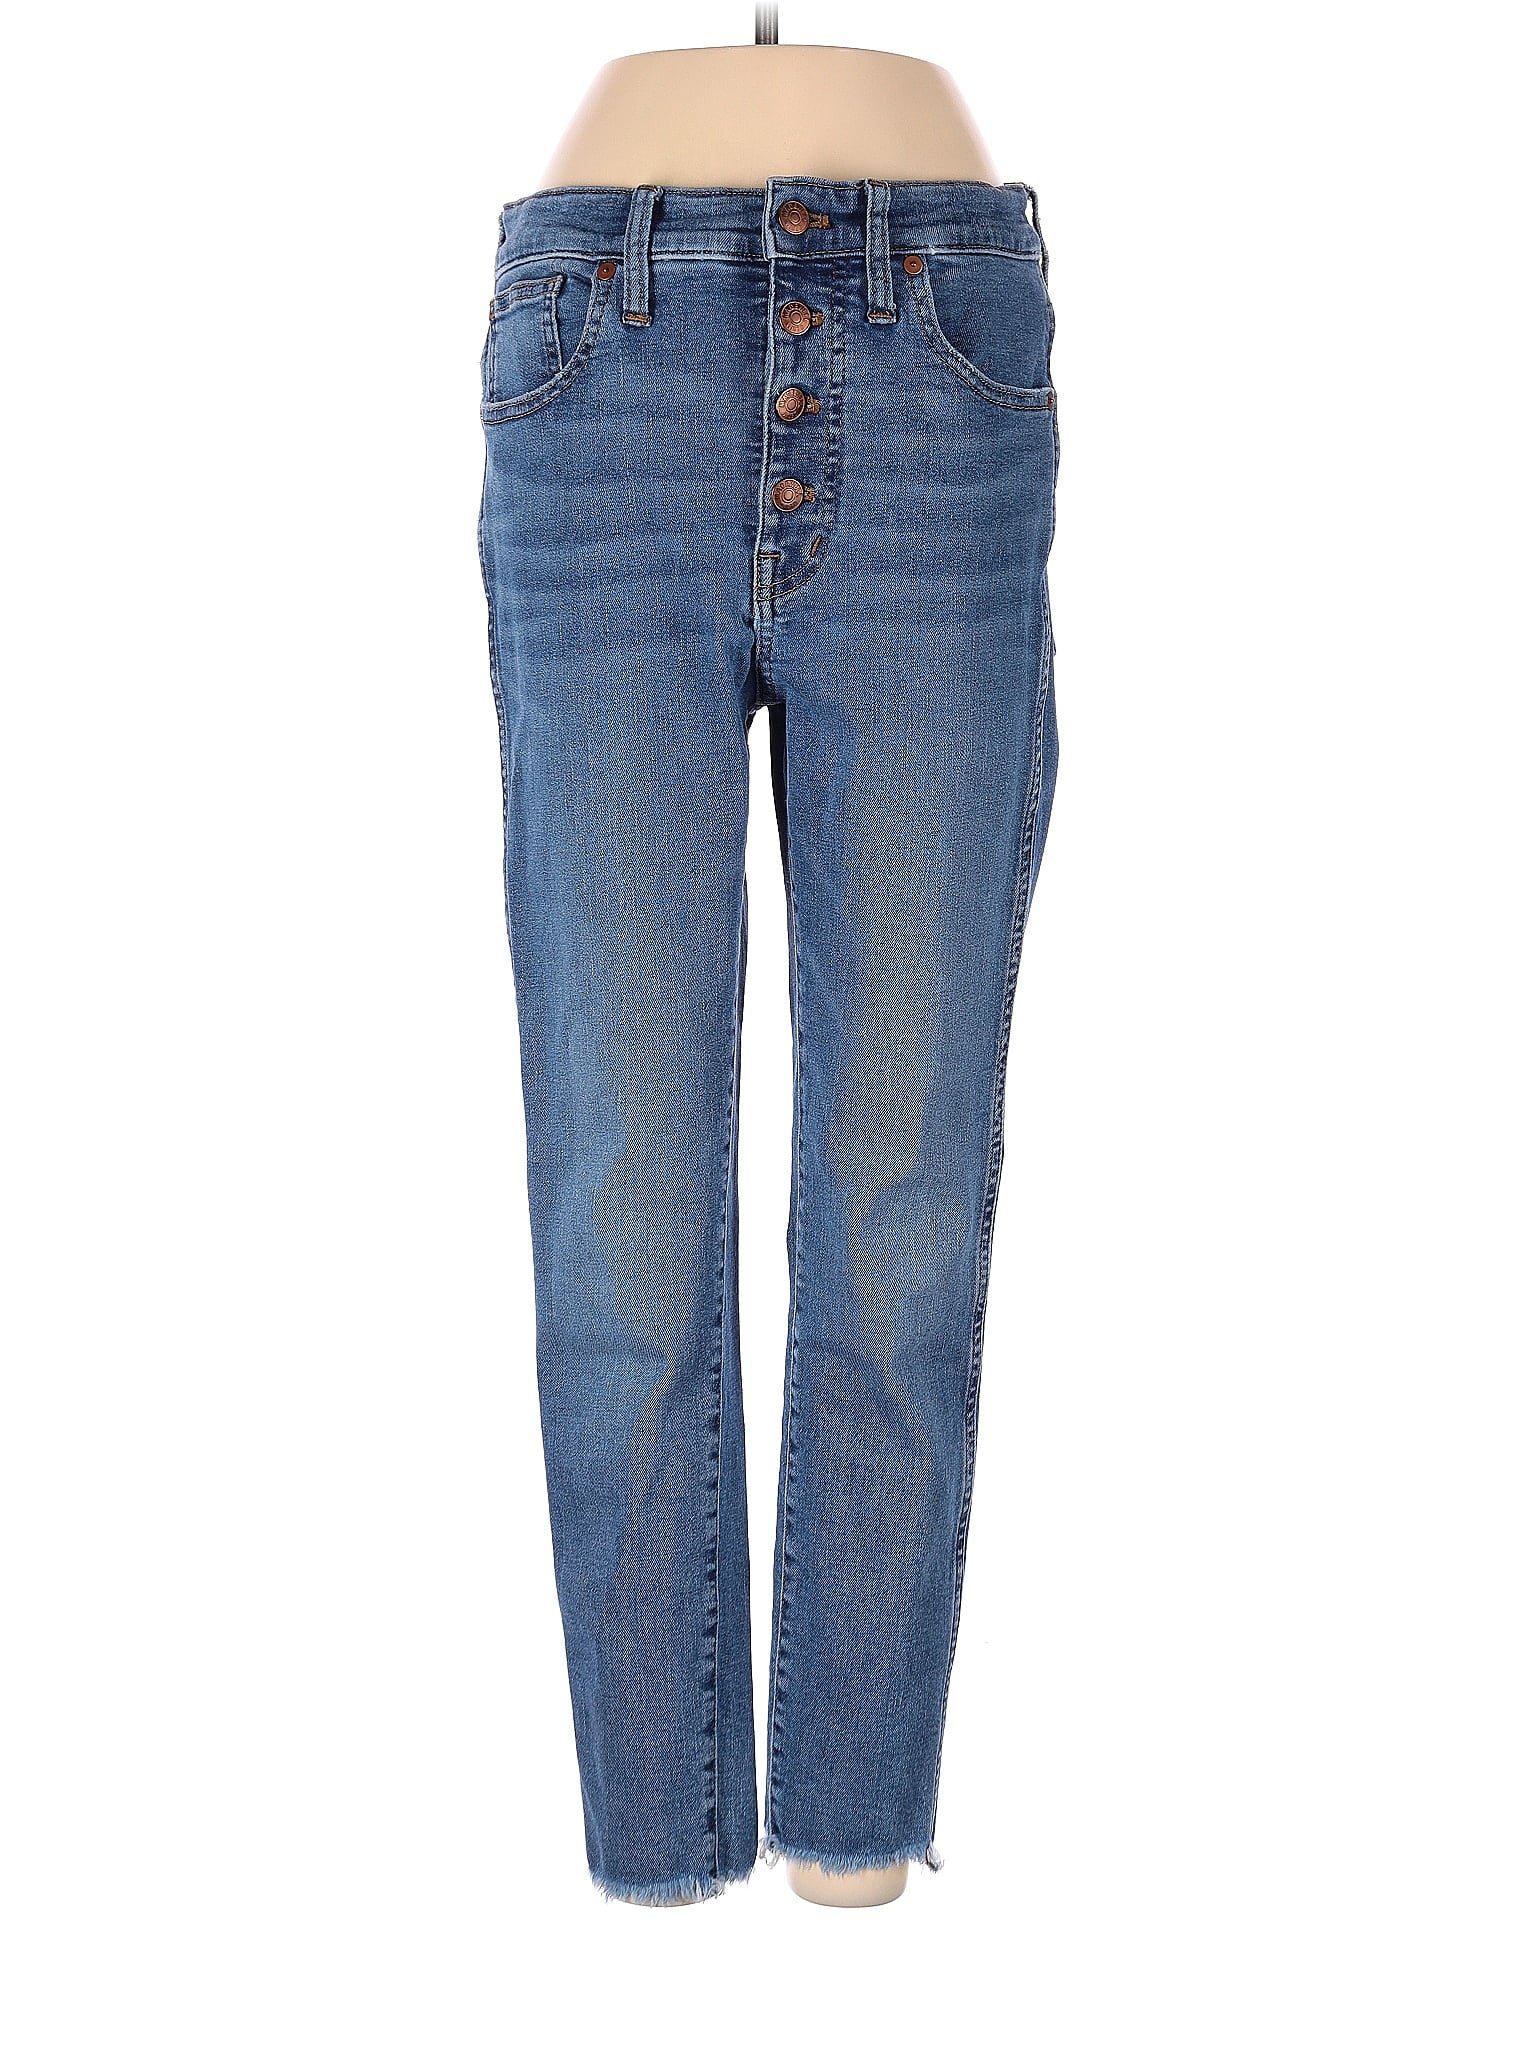 Mid-Rise Boyjeans Jeans in Medium Wash waist size - 28 P